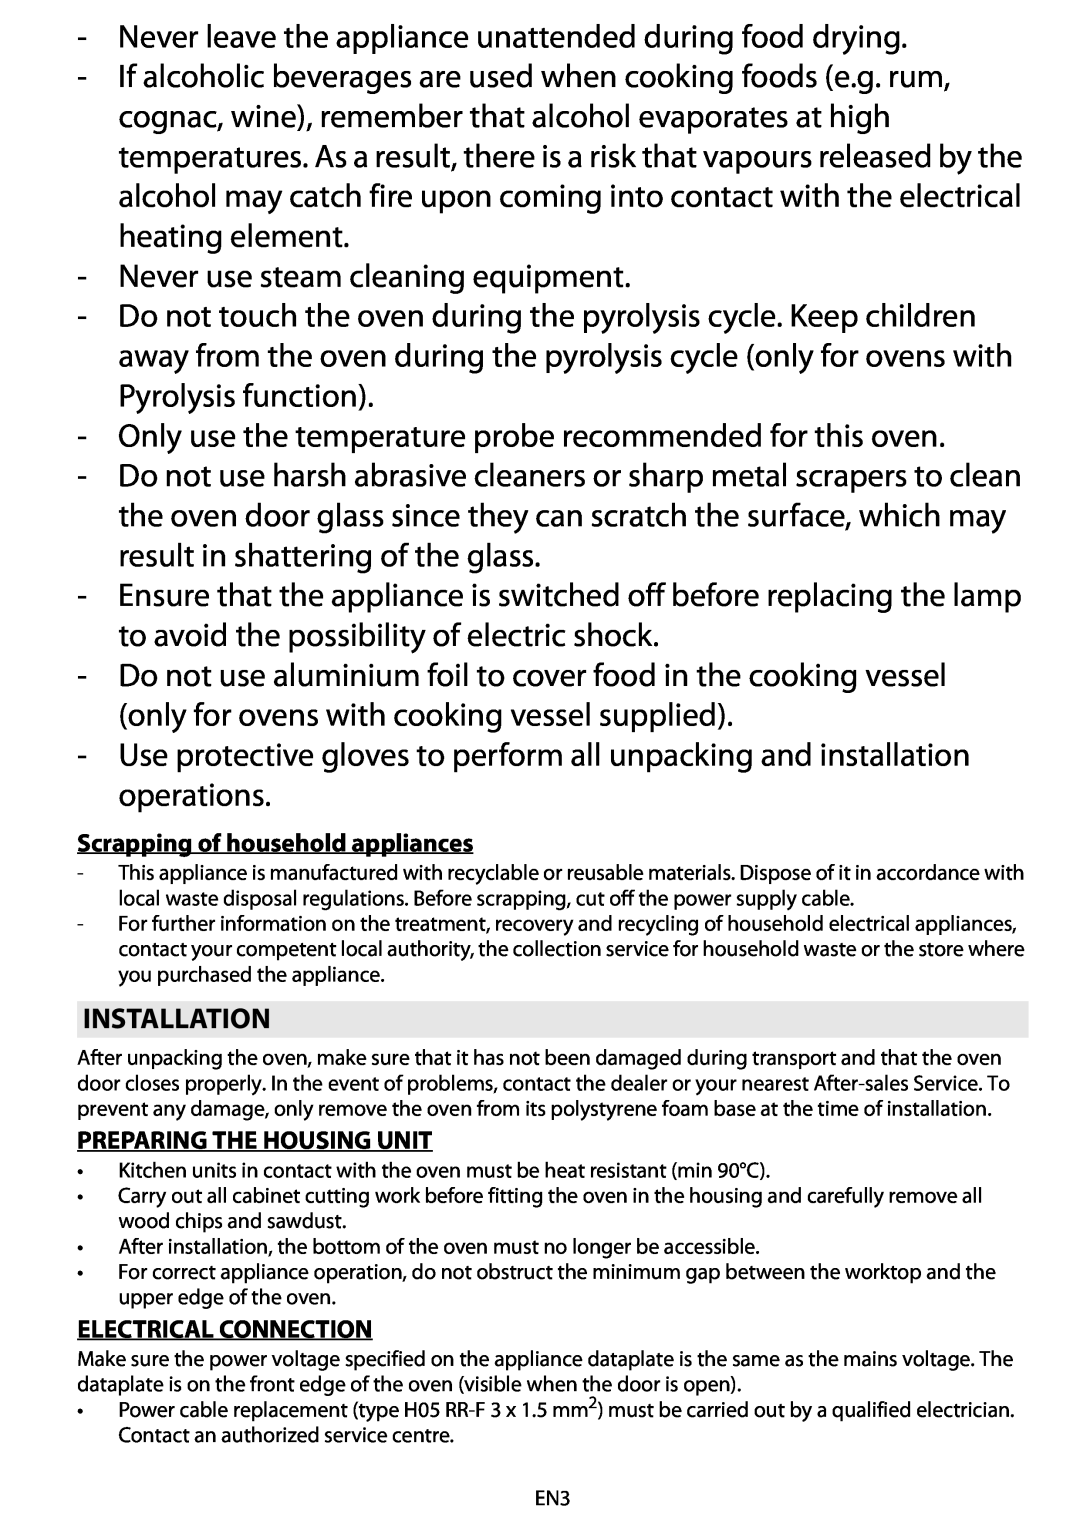 Whirlpool AKZM 775 manual do utilizador Never leave the appliance unattended during food drying 